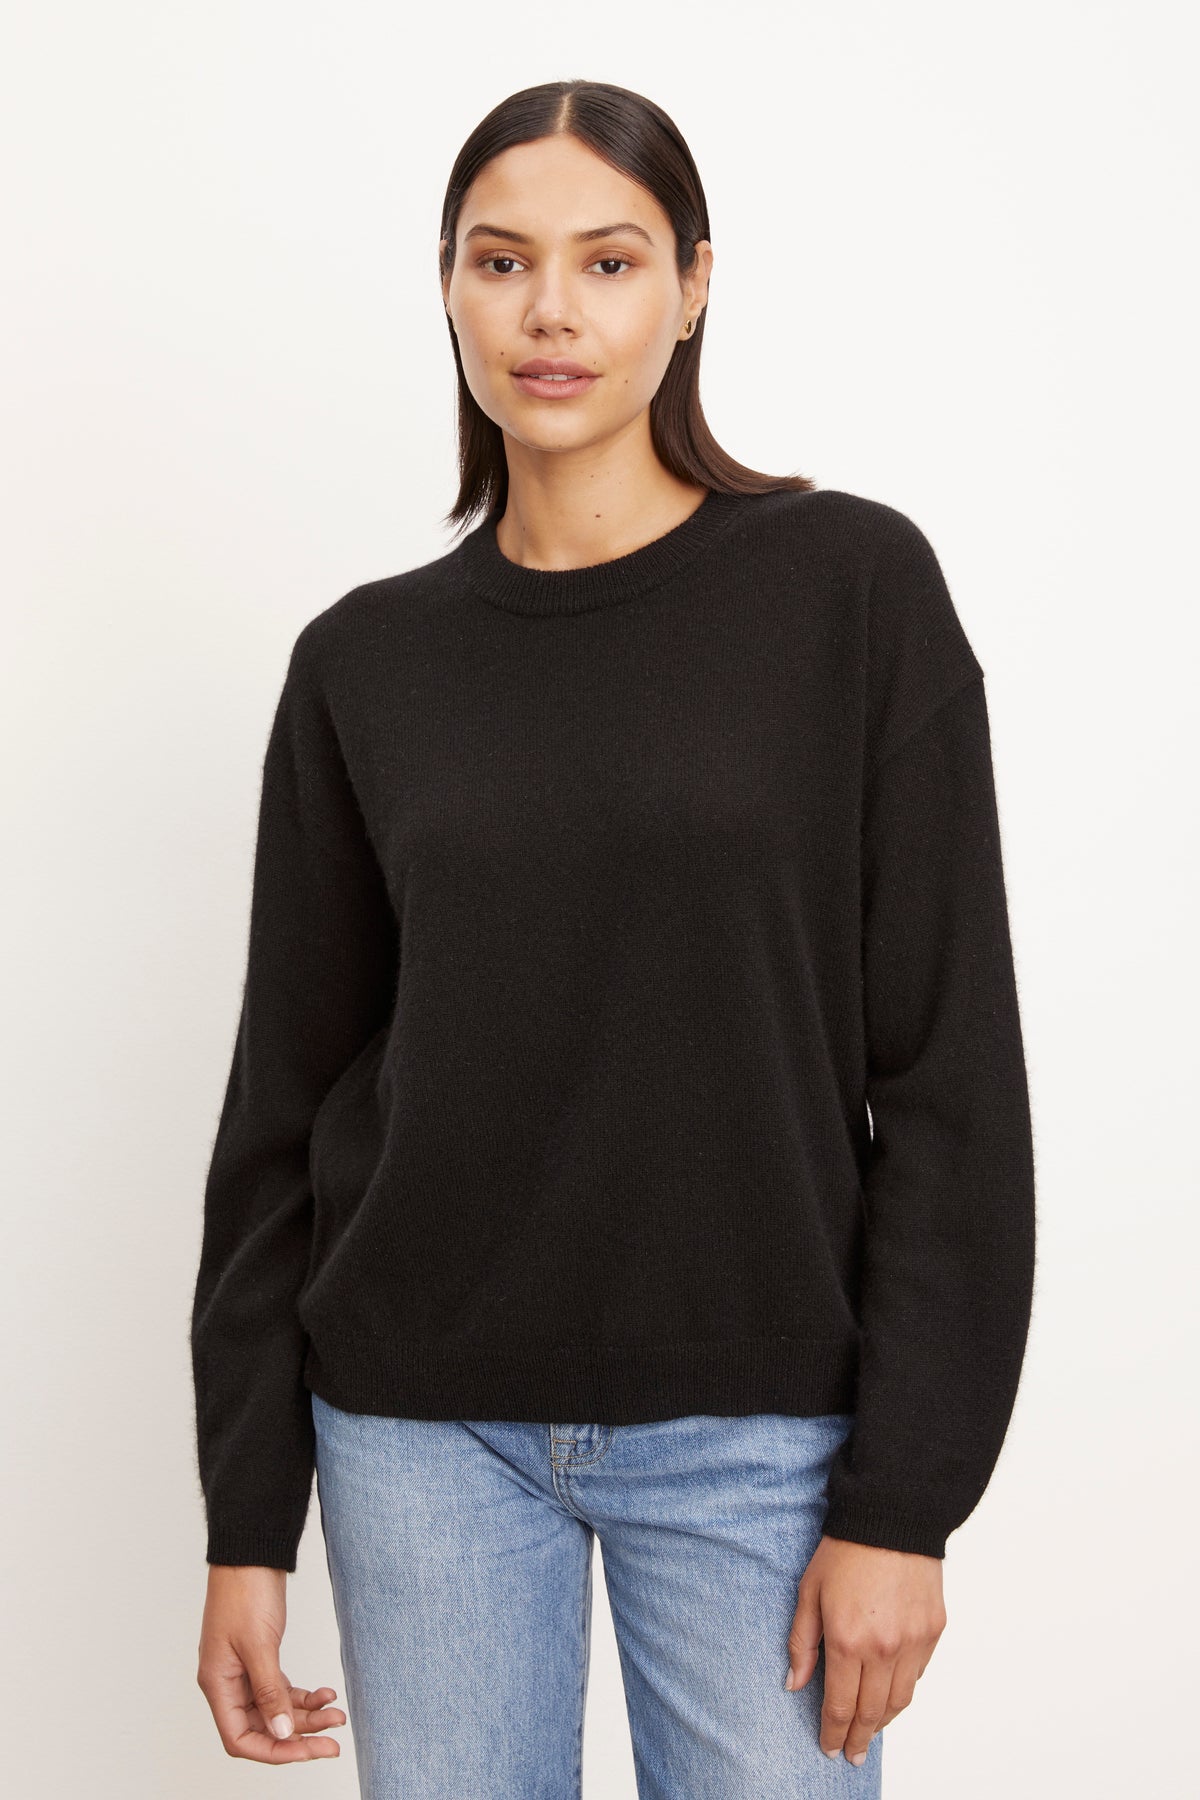 The BRYNNE CASHMERE CREW NECK SWEATER in black, by Velvet by Graham & Spencer.-26883604185281